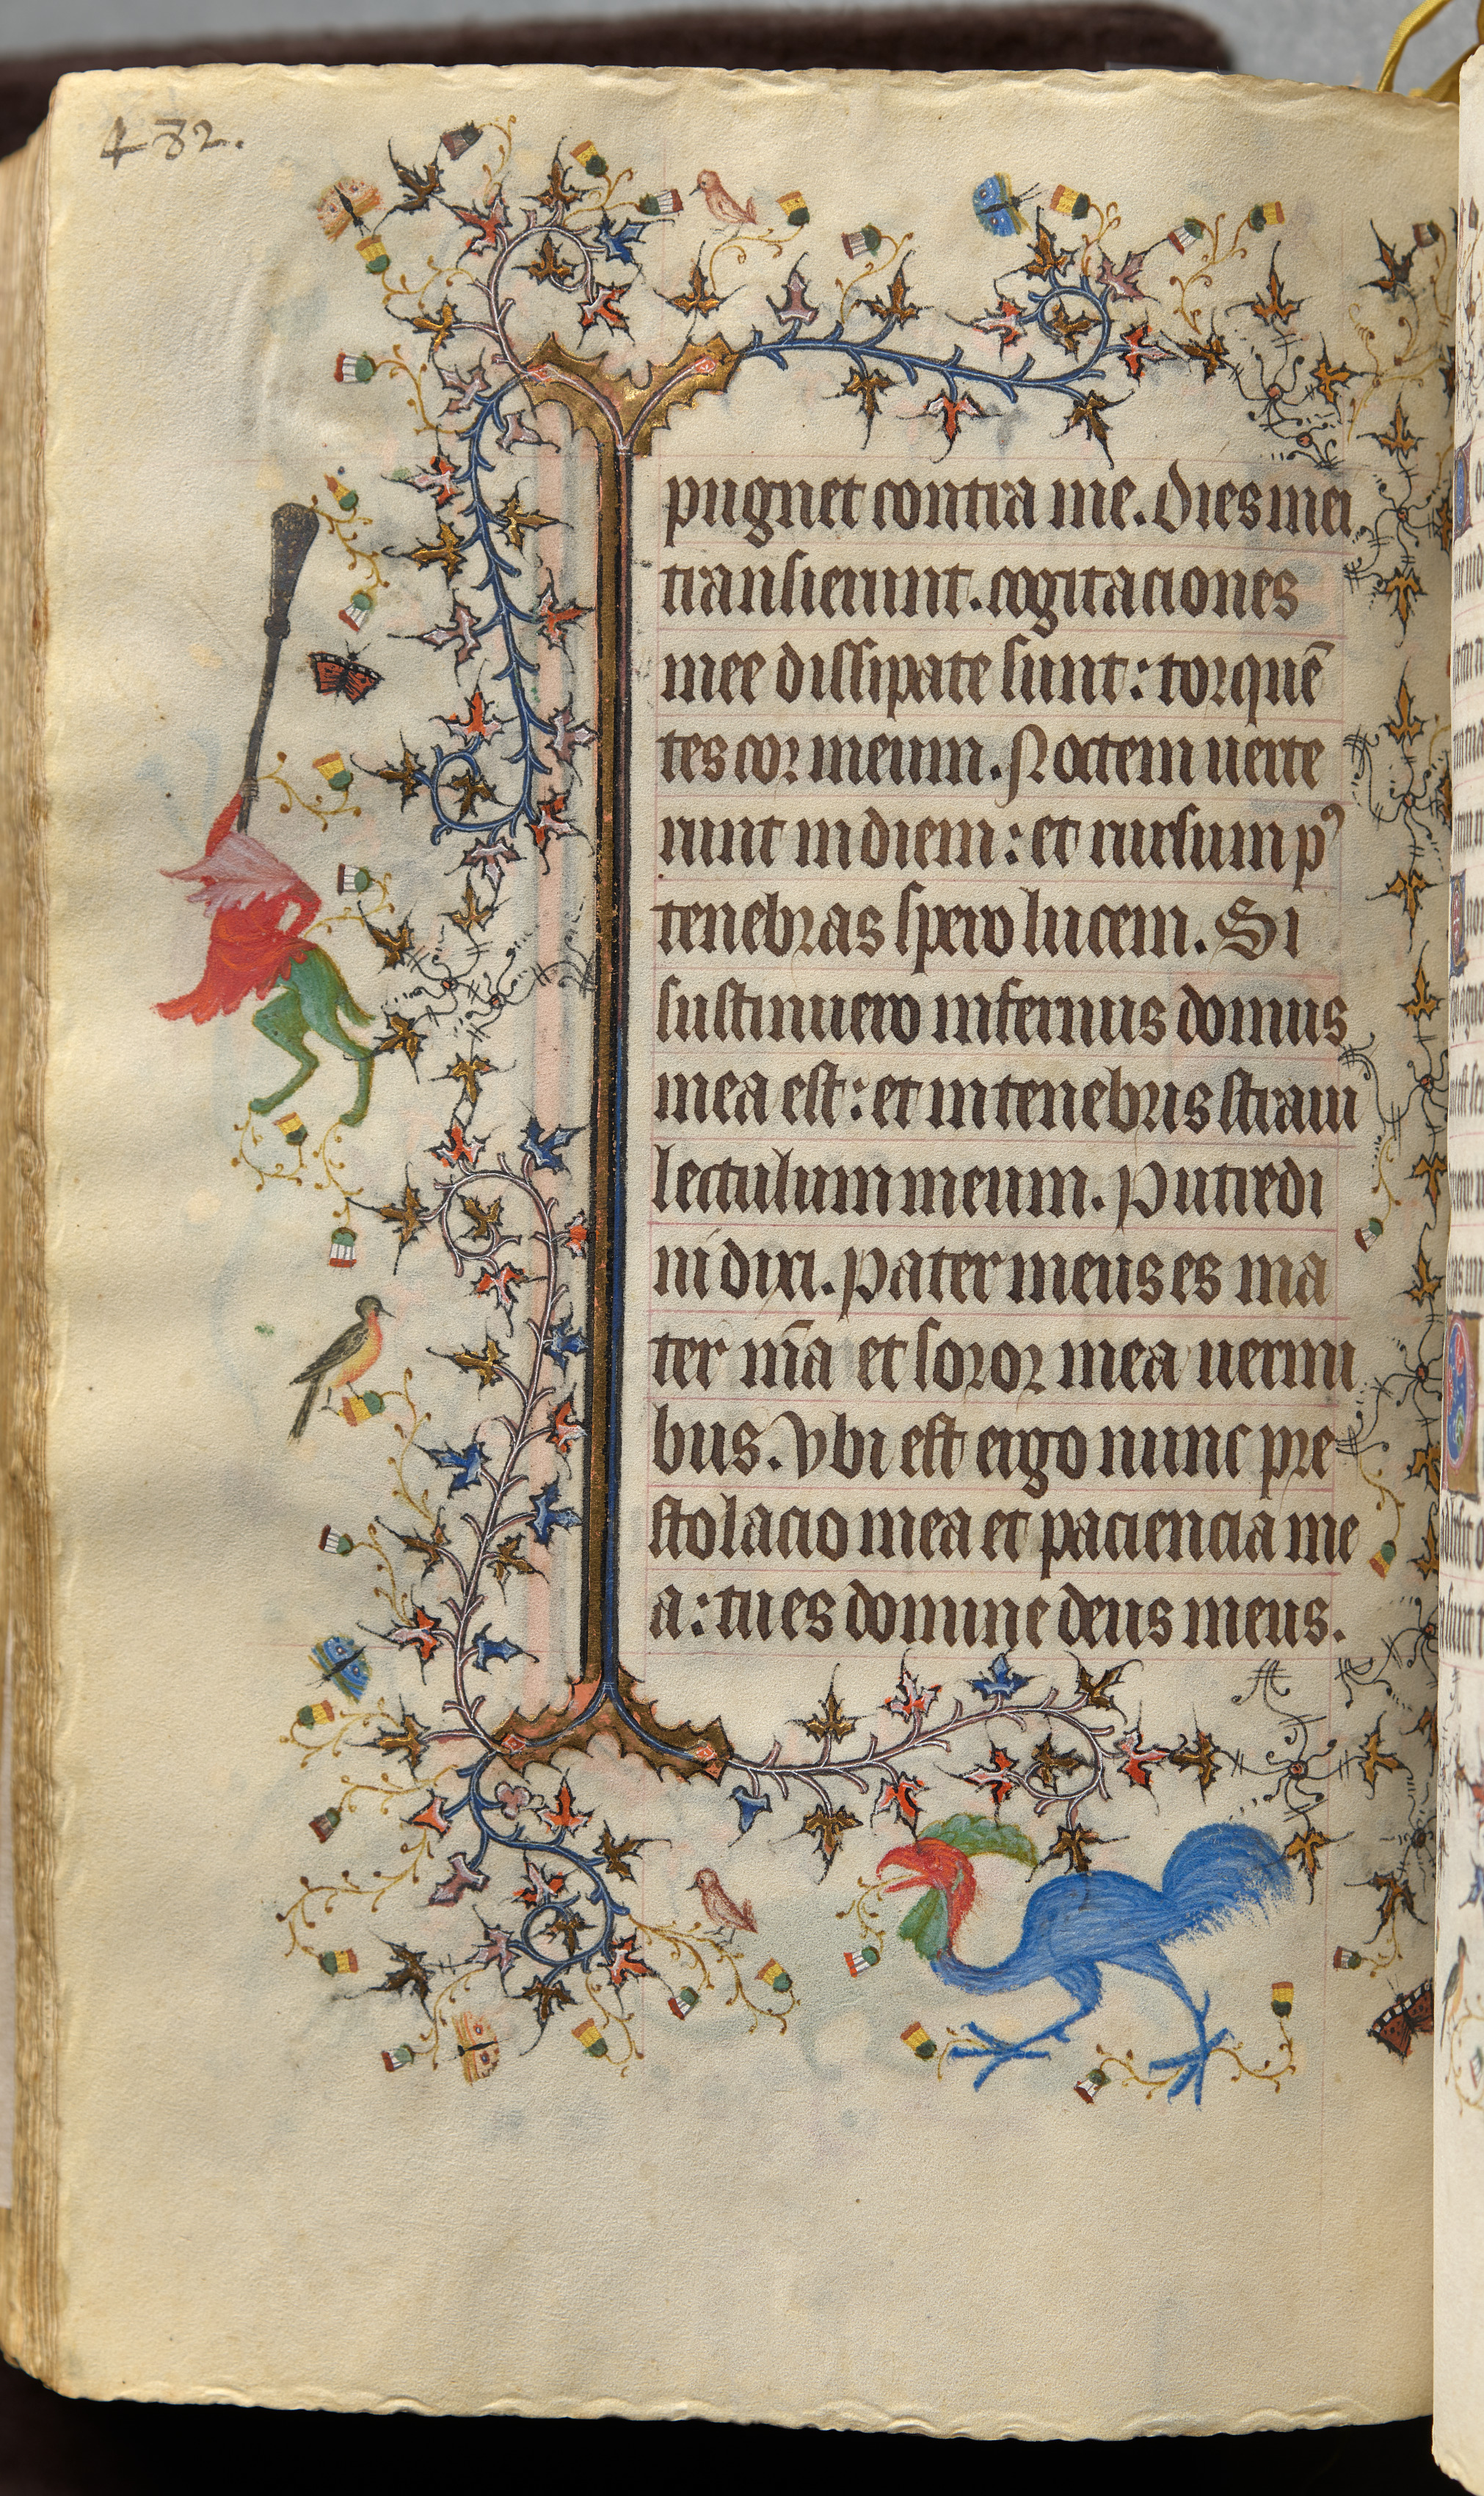 Hours of Charles the Noble, King of Navarre (1361-1425): fol. 235v, Text